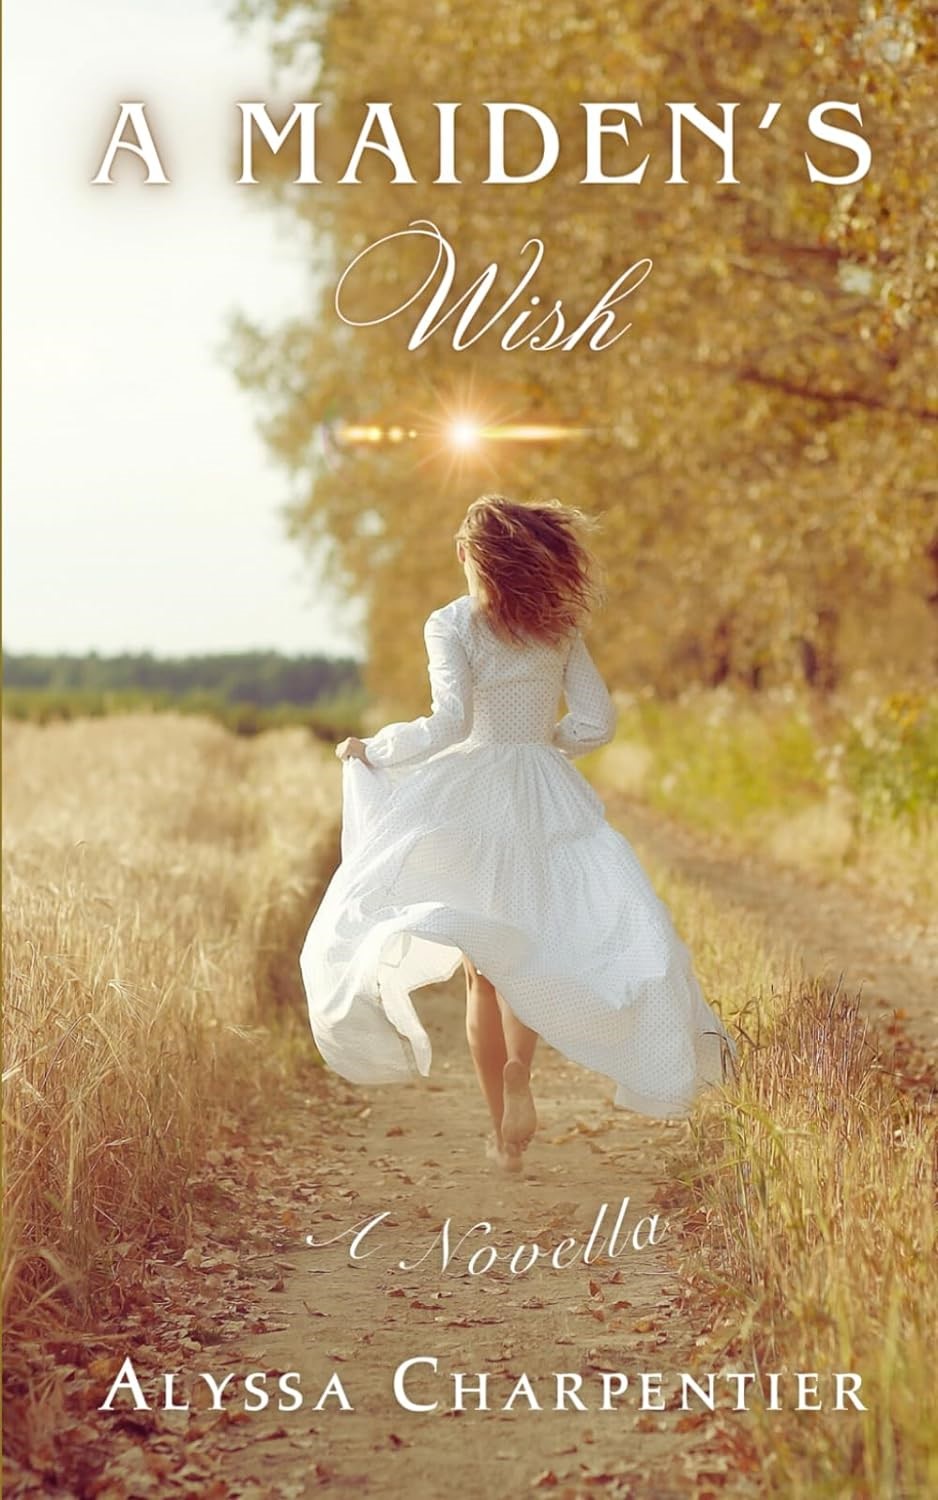 Two Sisters, One Magical Wish: Alyssa Charpentier’s "A Maiden’s Wish" Unfolds a Tale of Destiny, Family, and the Power of Choices